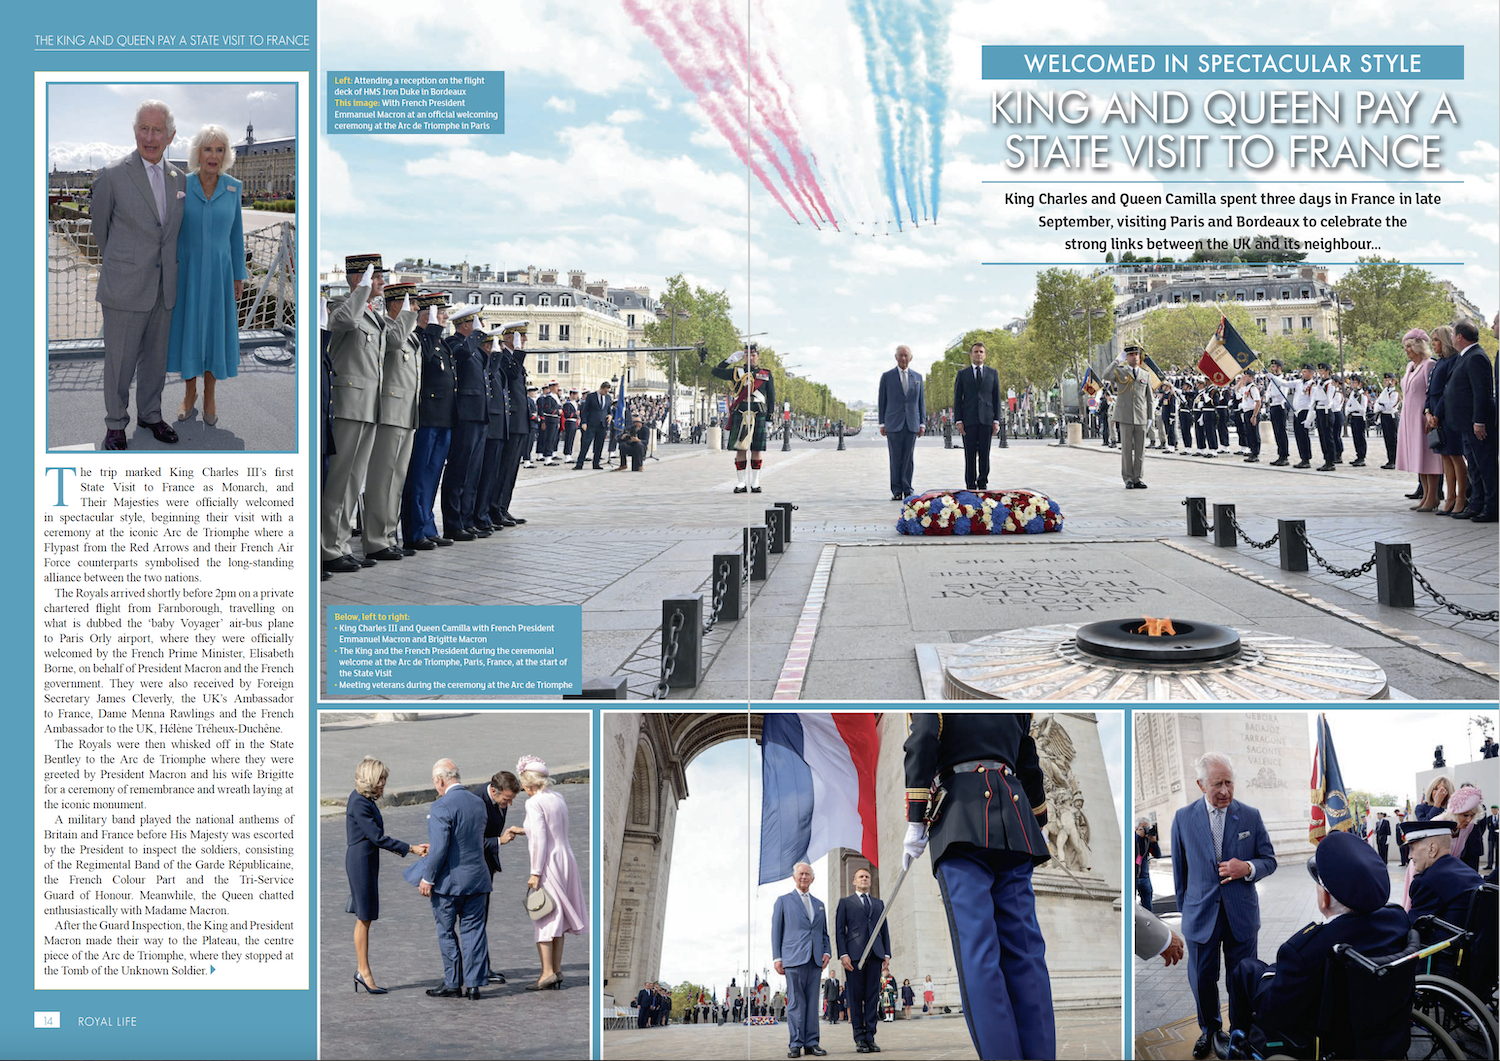 The King and Queen Pay a State Visit to France - Royal Life Magazine - Issue 66